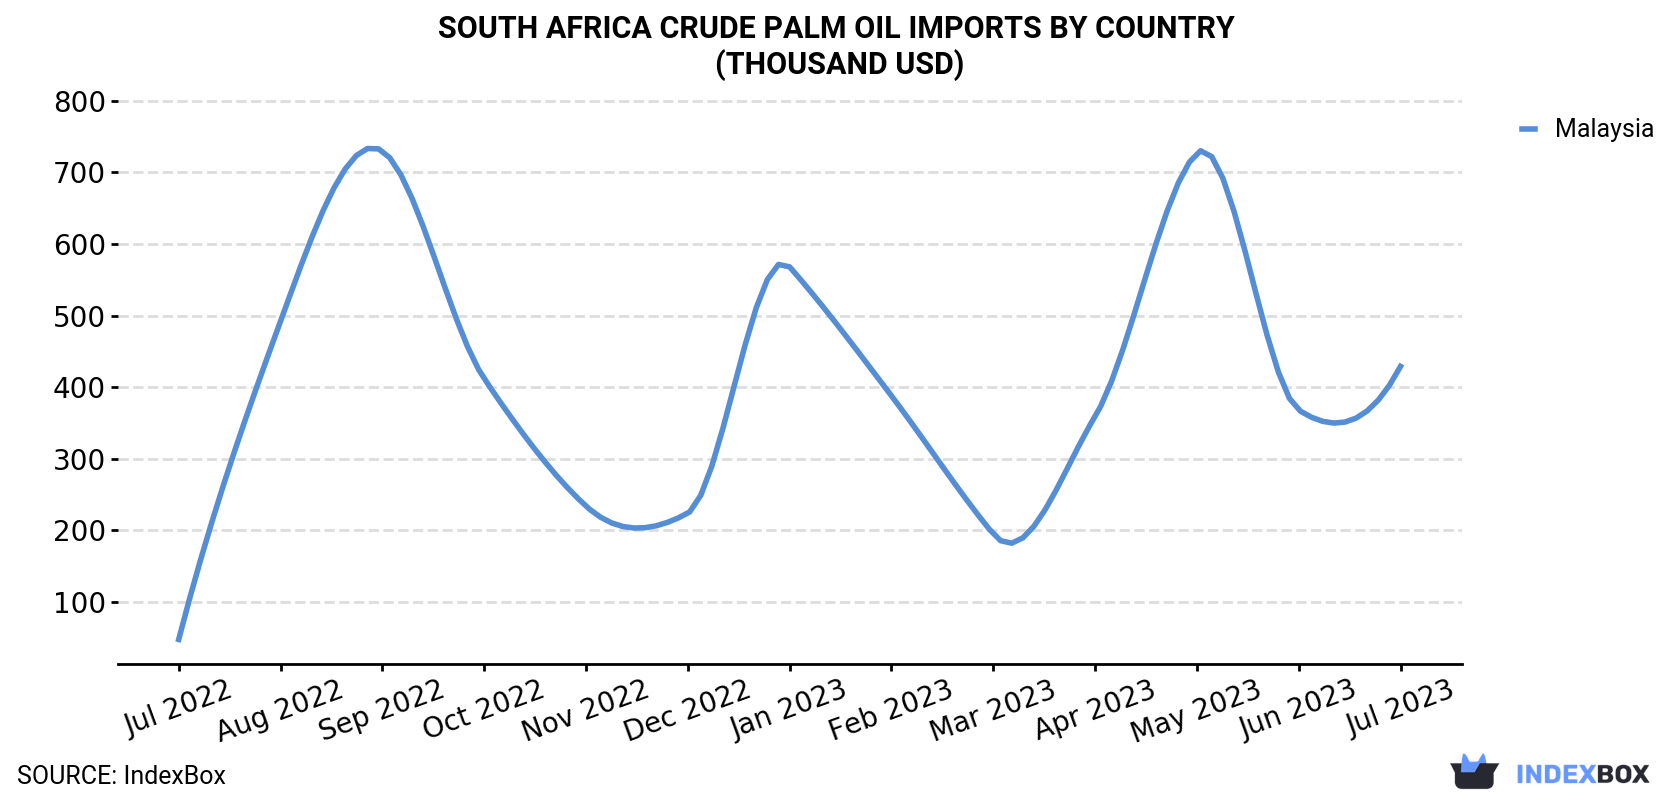 South Africa Crude Palm Oil Imports By Country (Thousand USD)